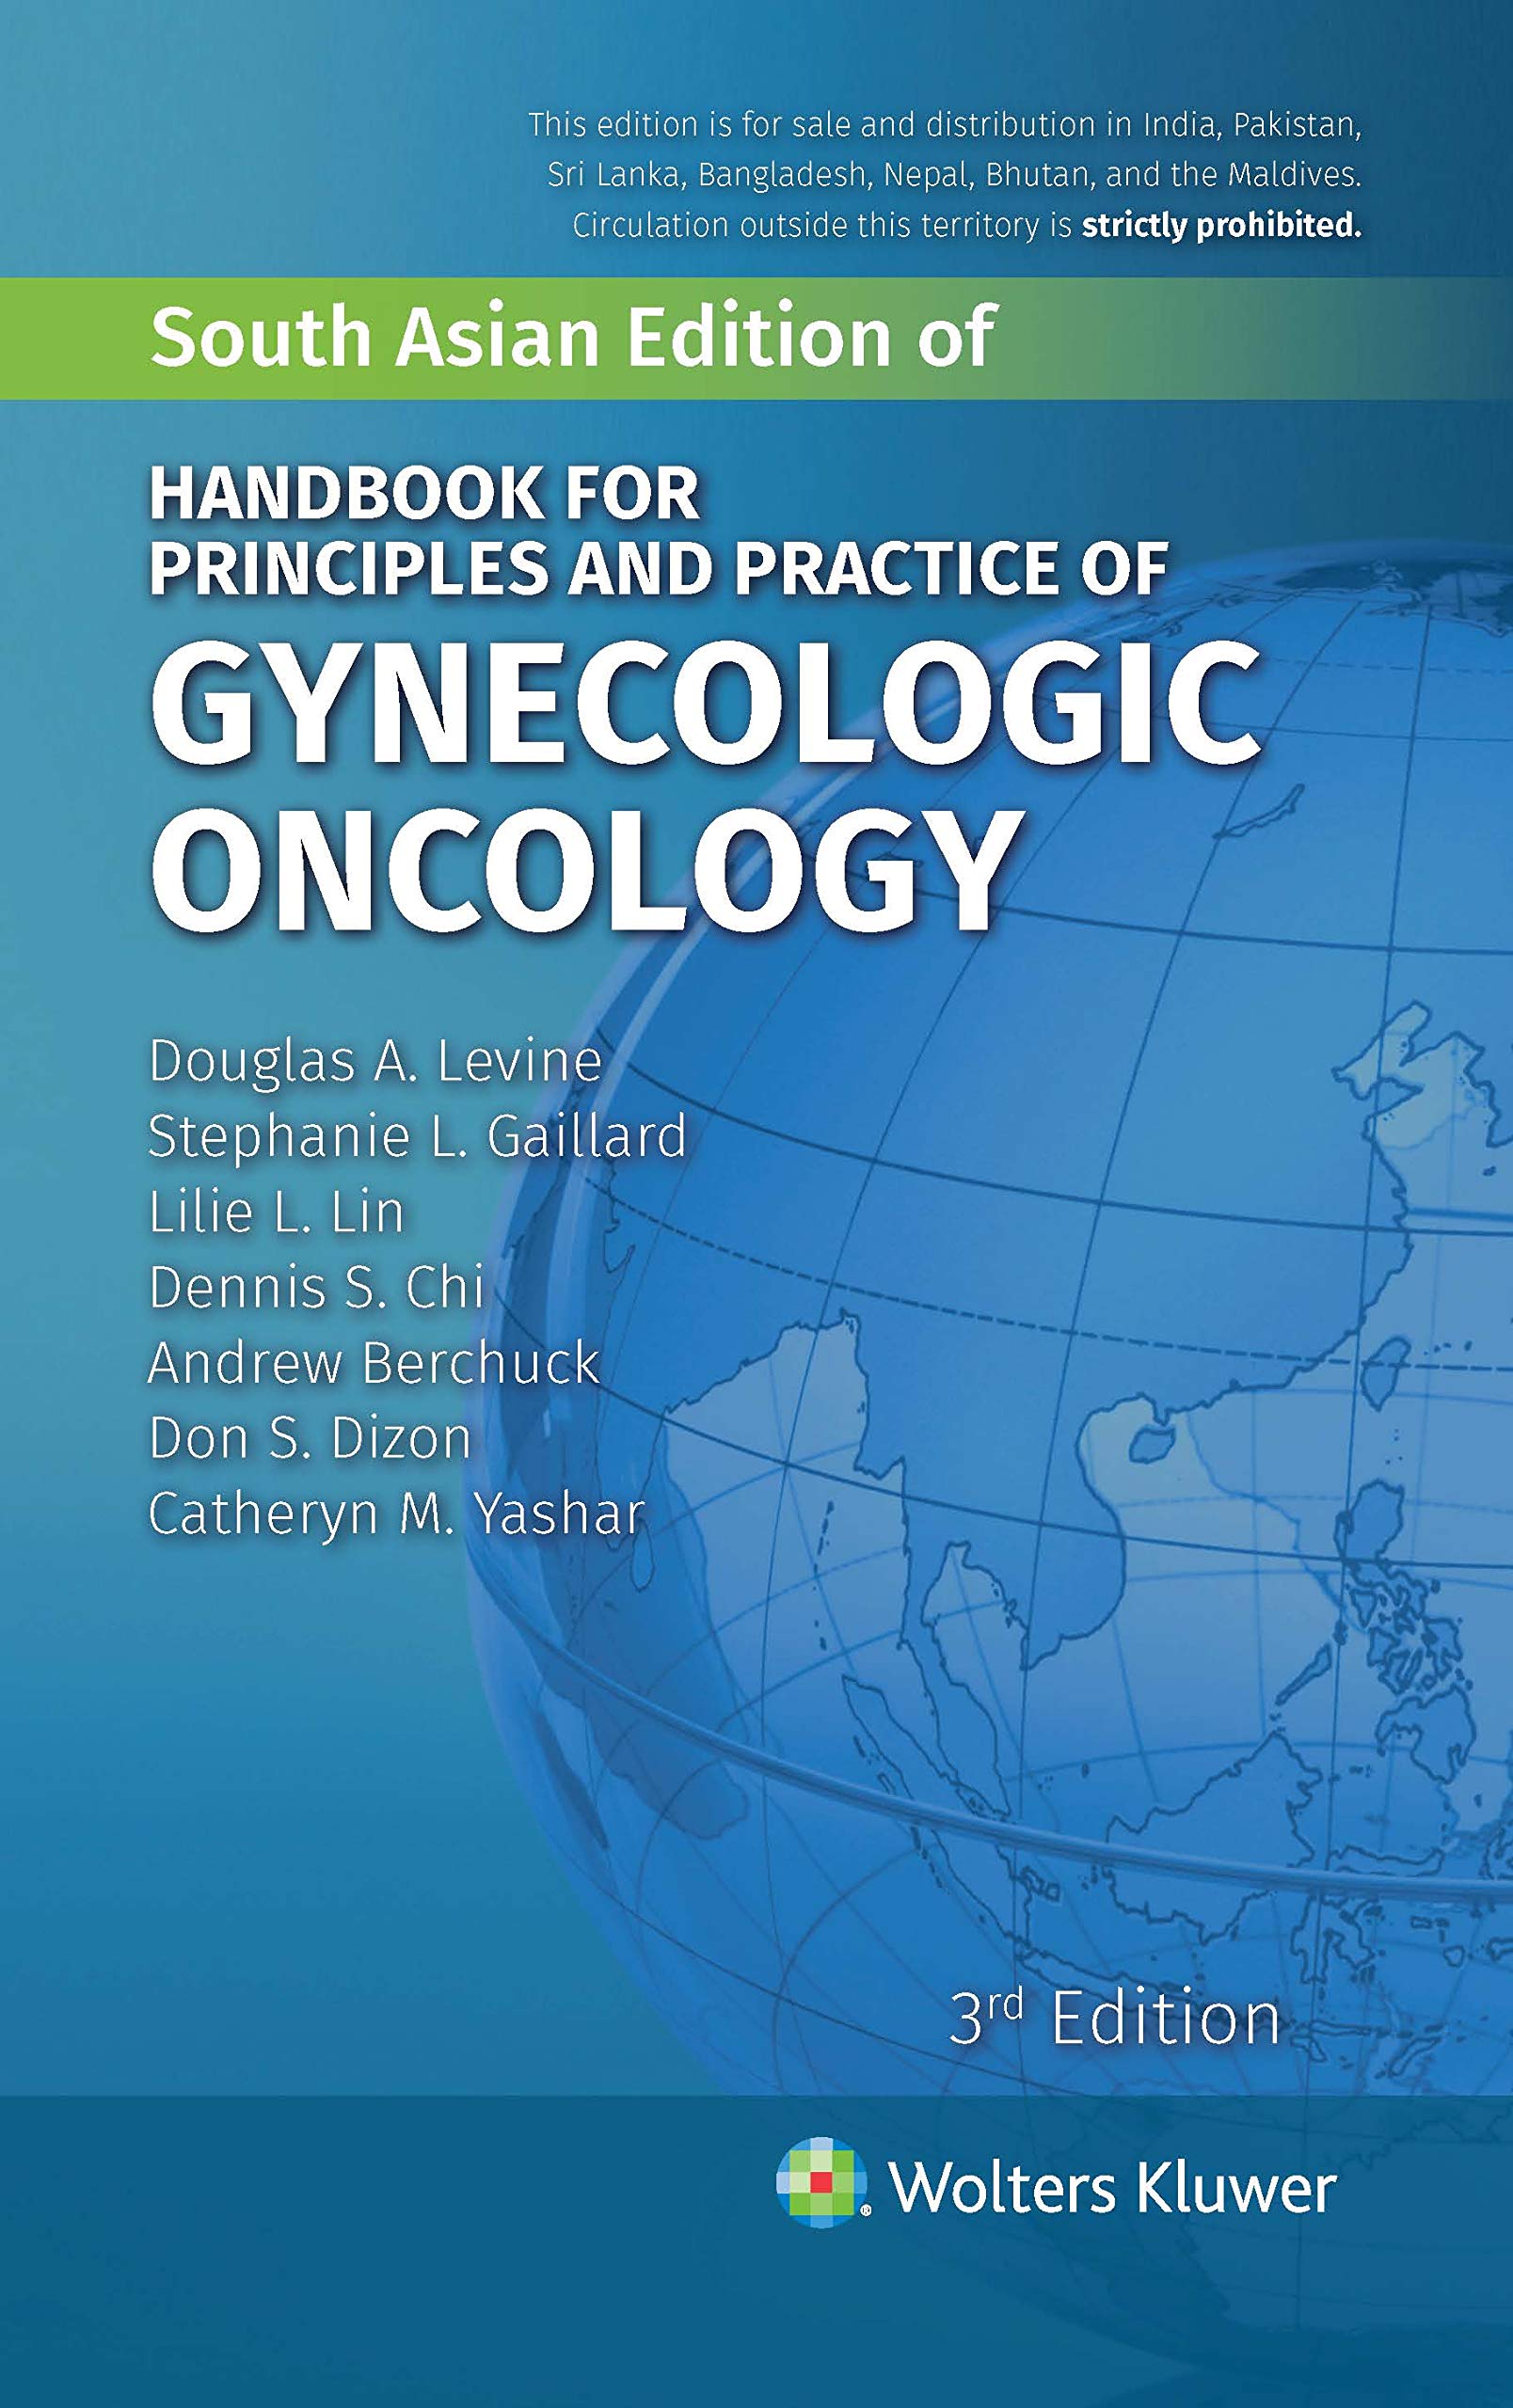 Handbook For Principles And Practice Of Gynecologic Oncology